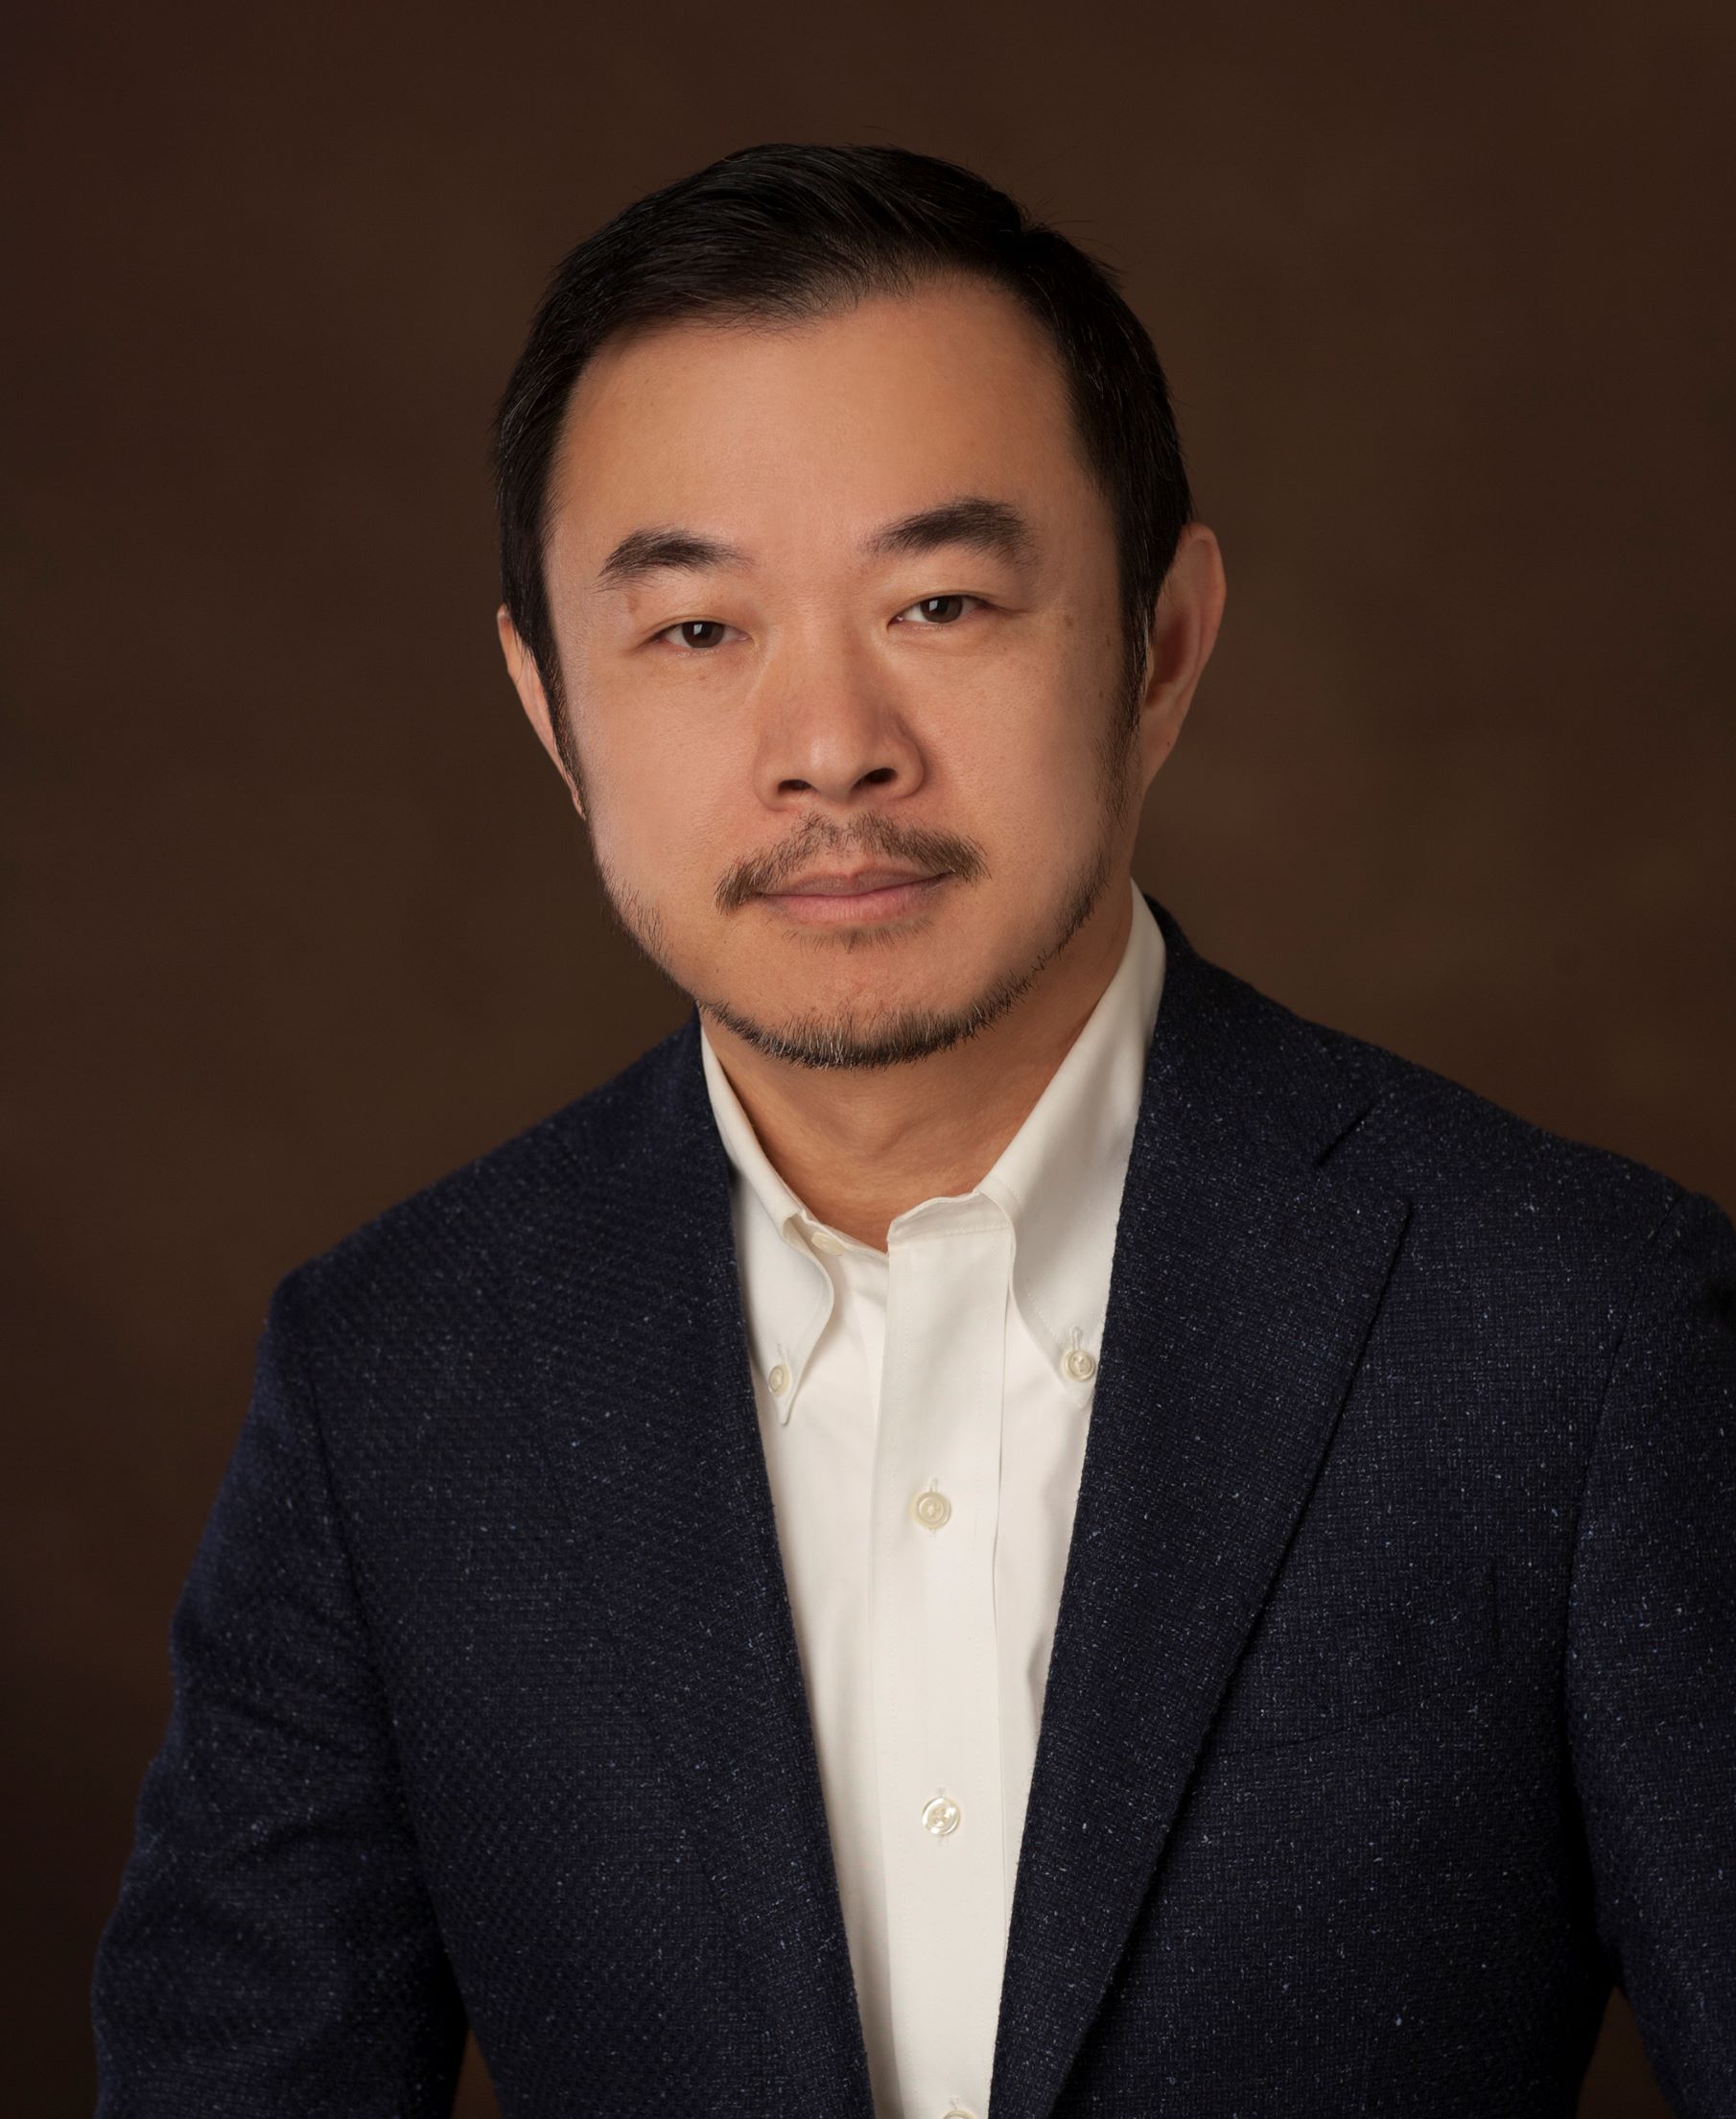 Image for MBZUAI Appoints World-Renowned Leading AI Academic Professor Dr. Eric Xing As President